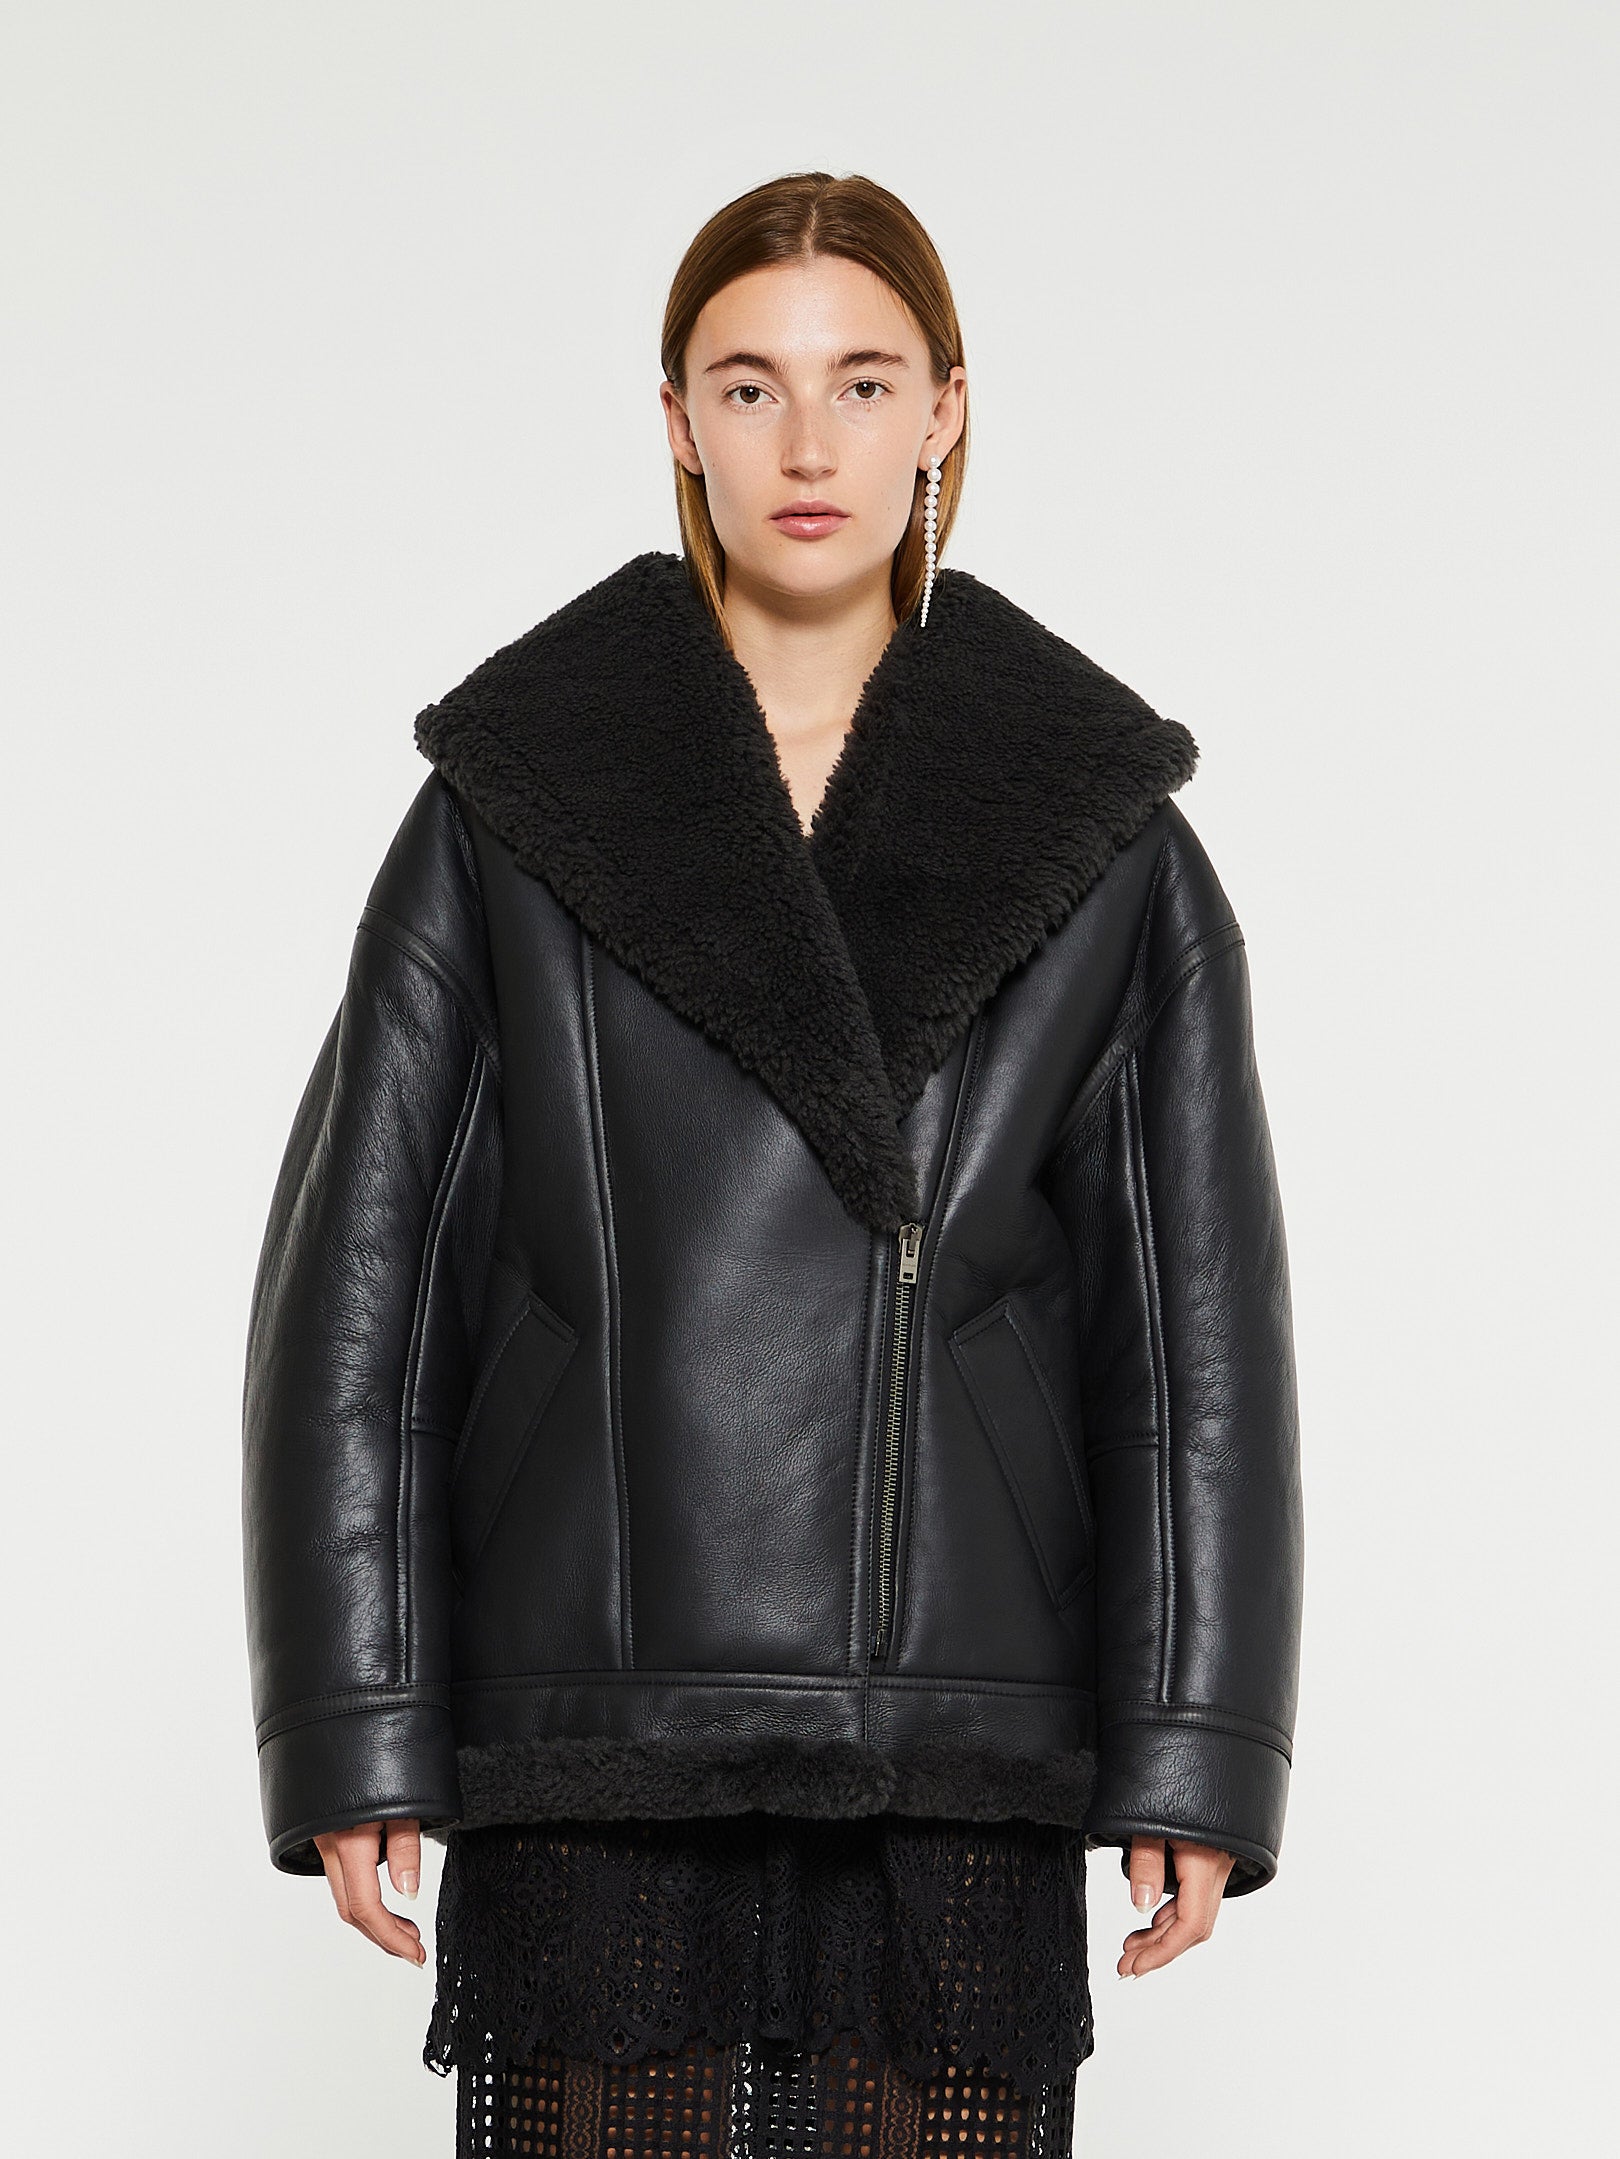 Acne Studios - Leather Shearling Jacket in Black